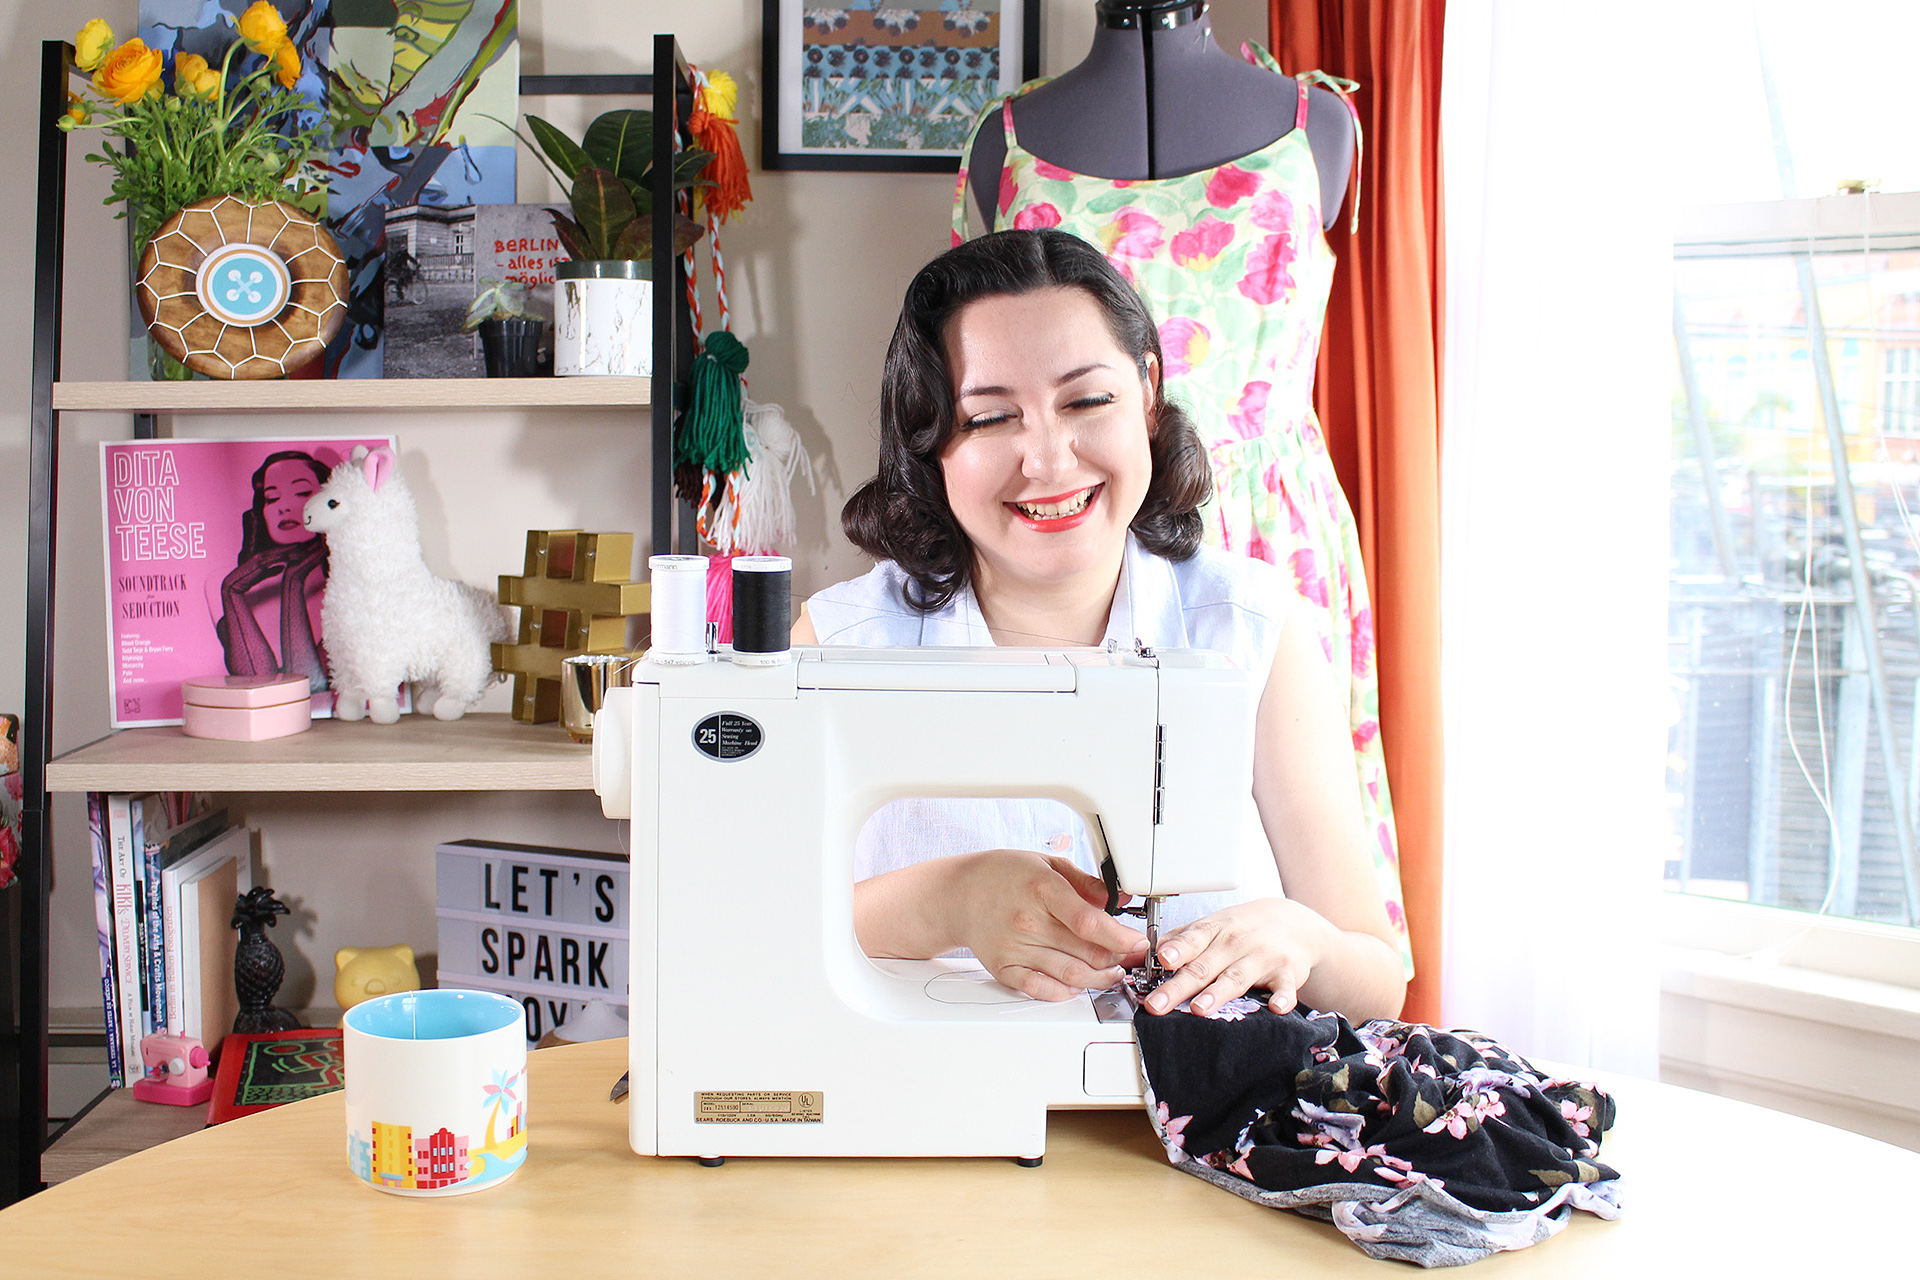 How to sew vintage, tutorials and tips for handmade clothing | Vintage on Tap